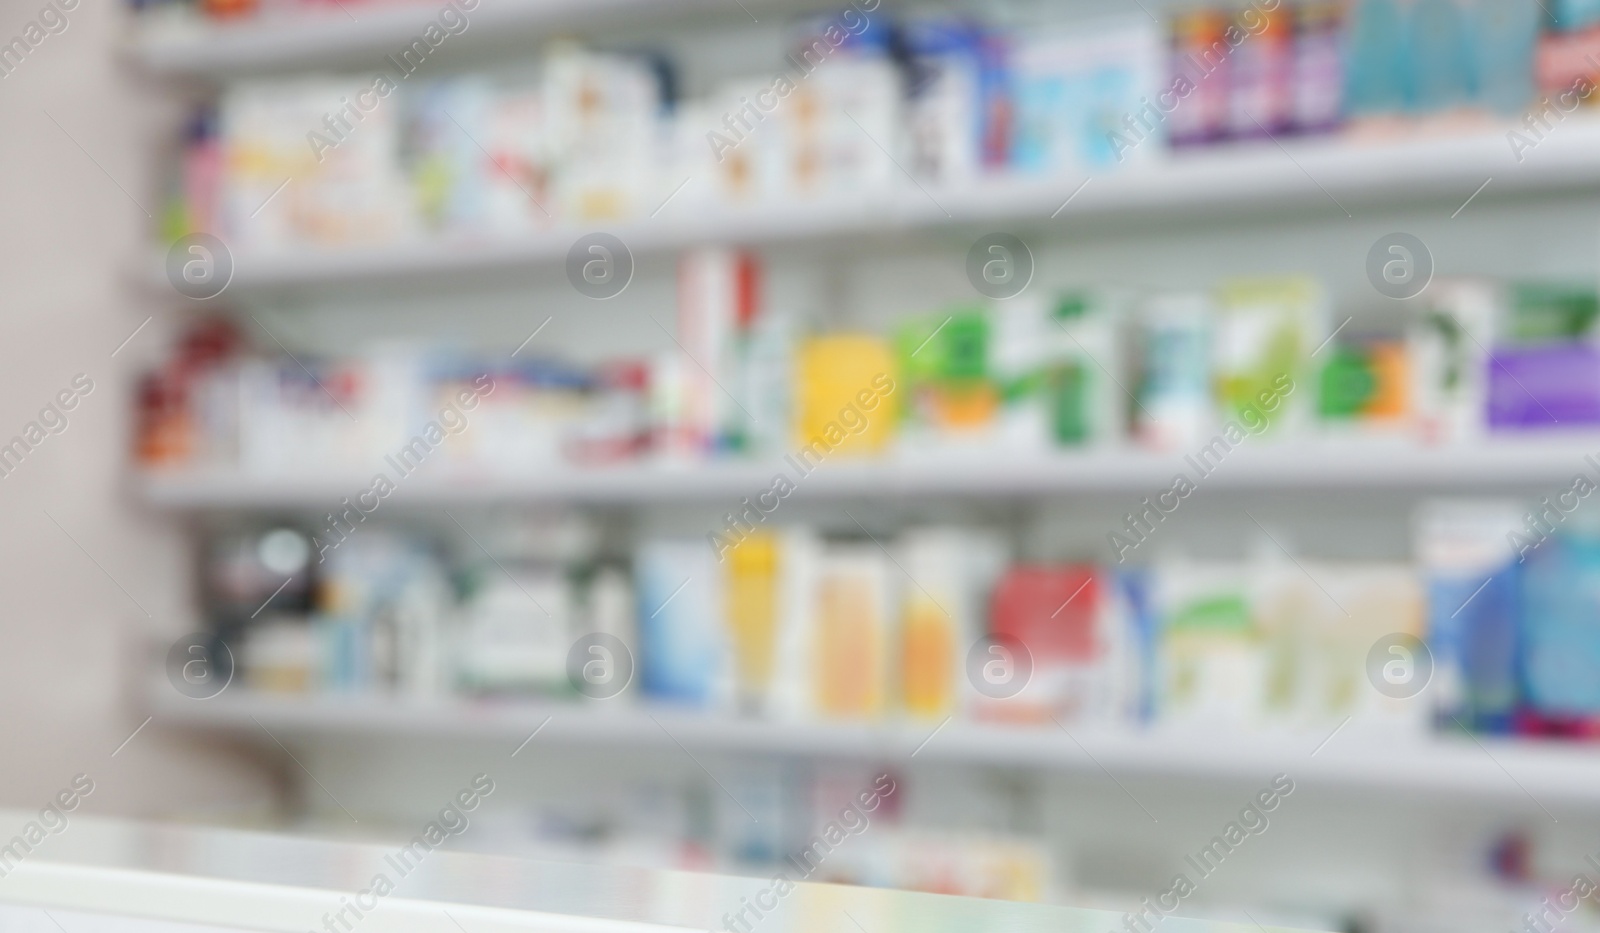 Image of Shelves with pharmaceuticals in drugstore, blurred view. Banner design